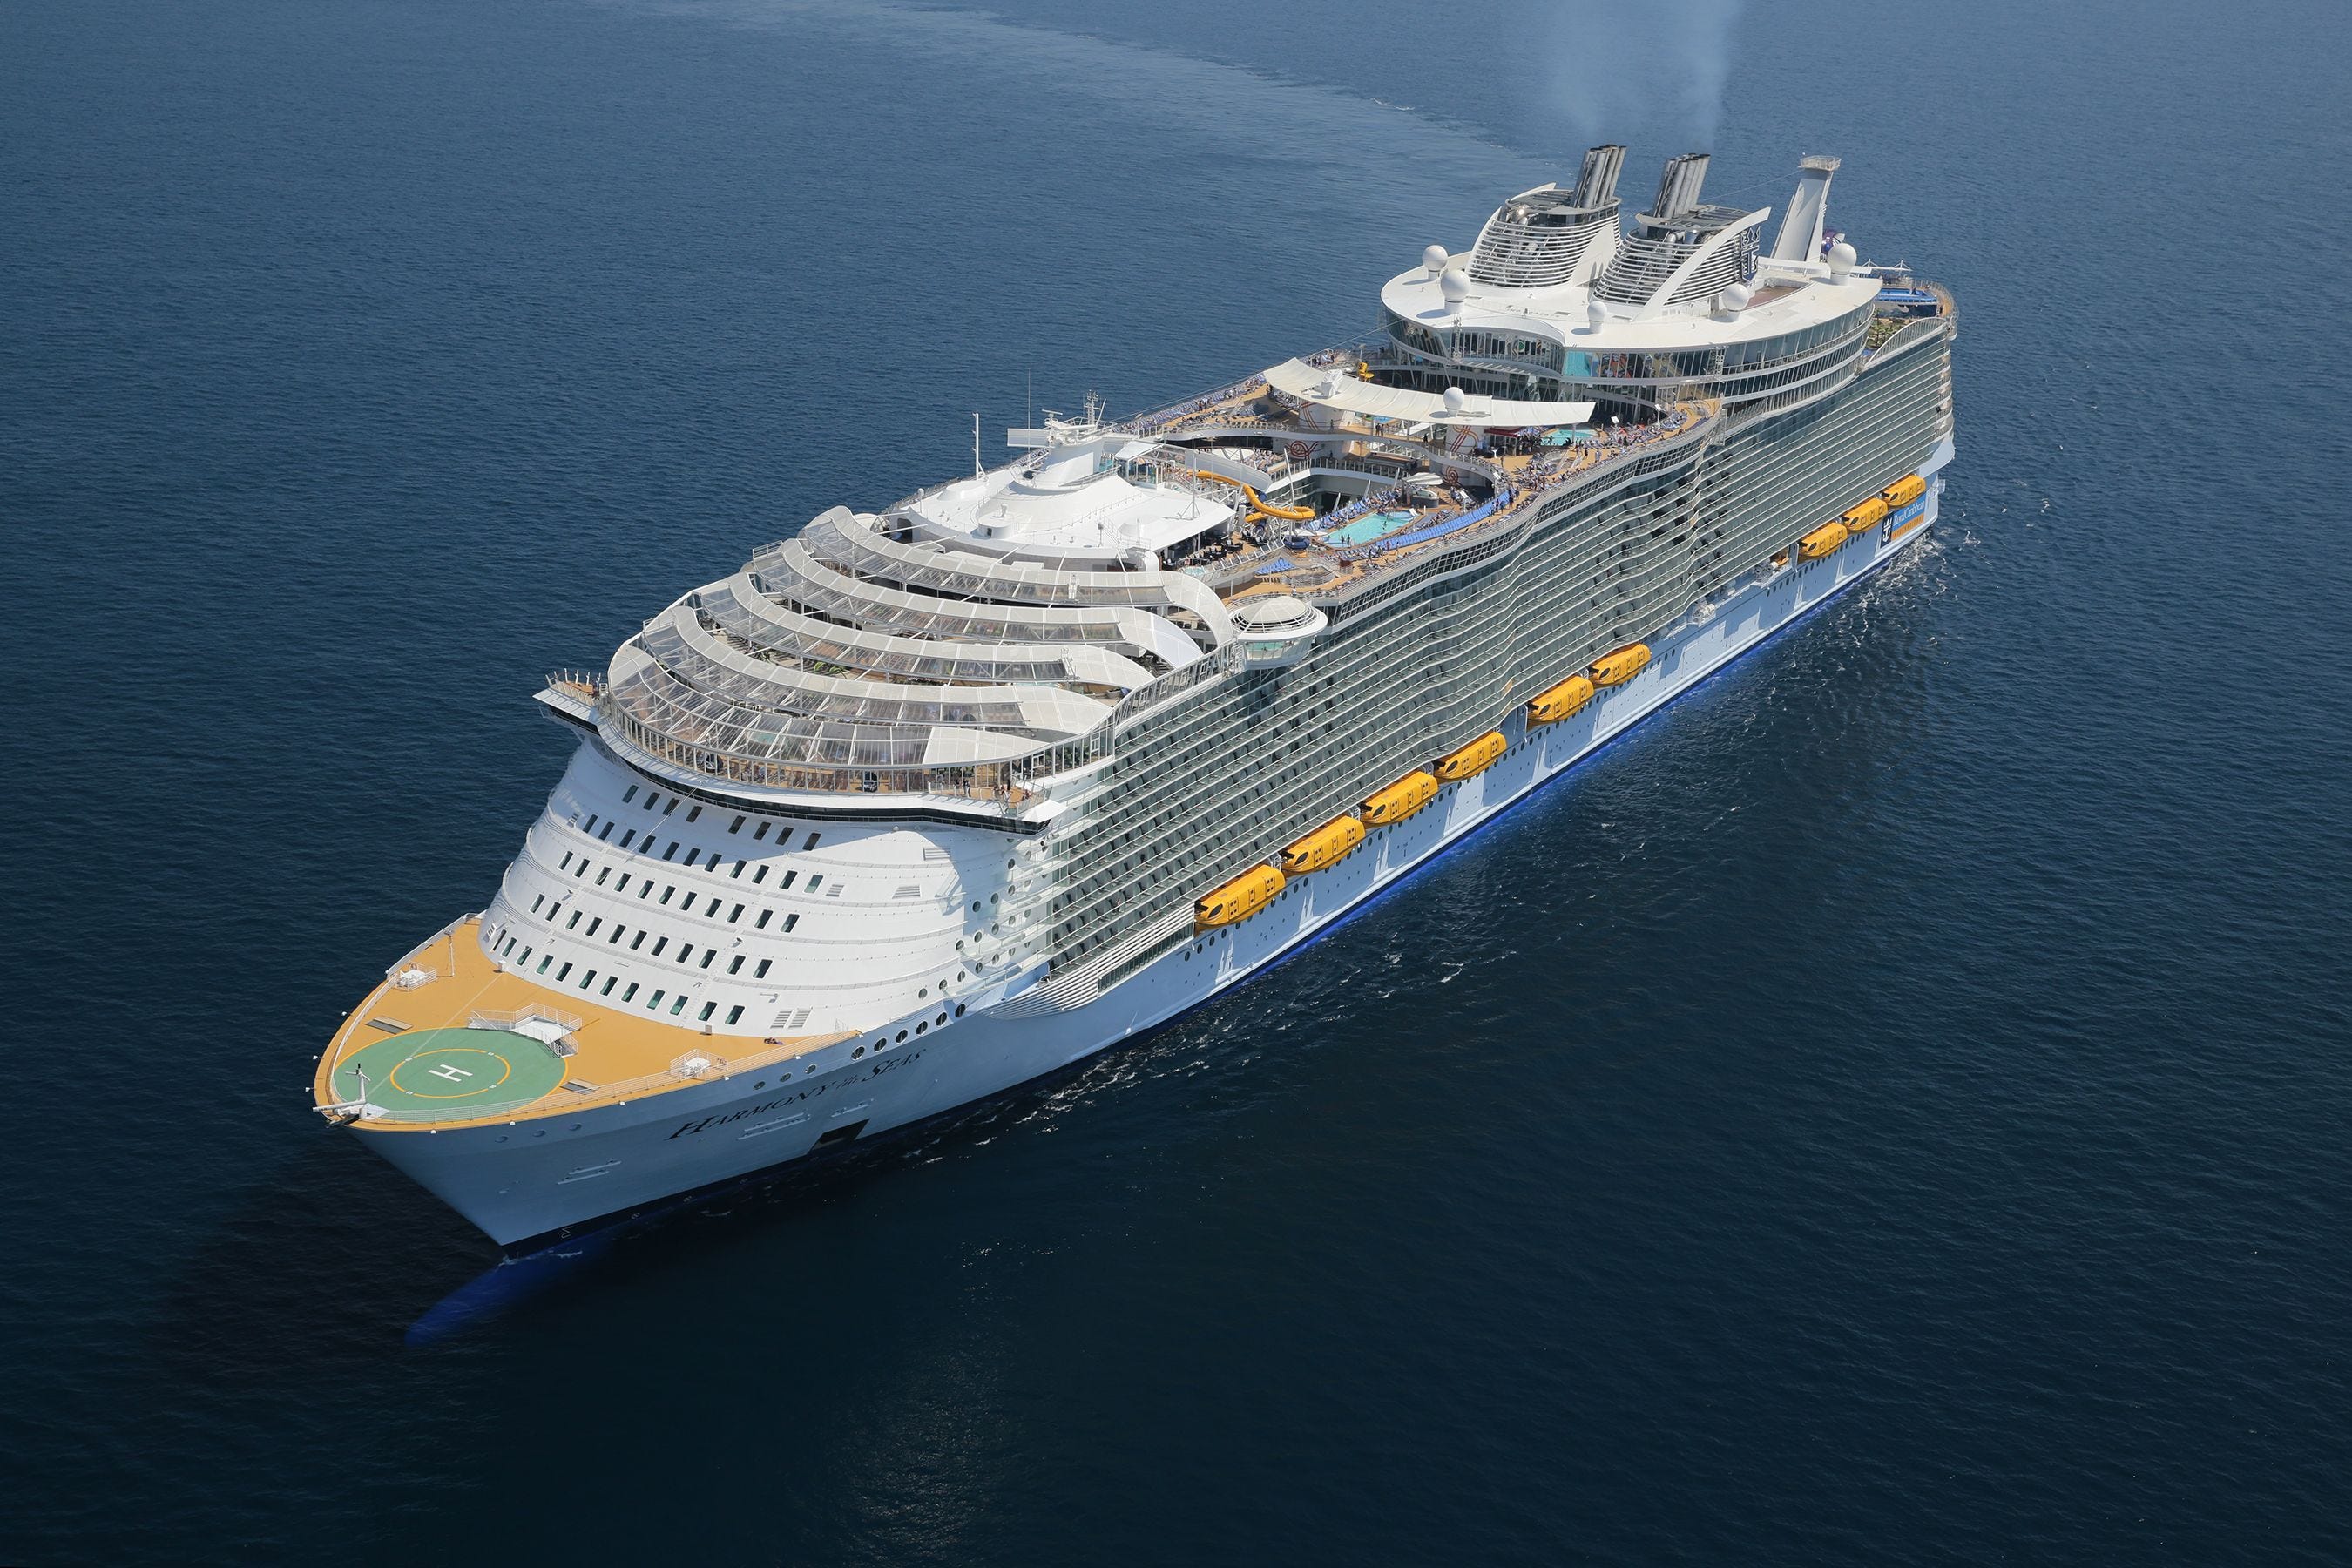 New Royal Caribbean Symphony of the Seas cruise ship will be the world